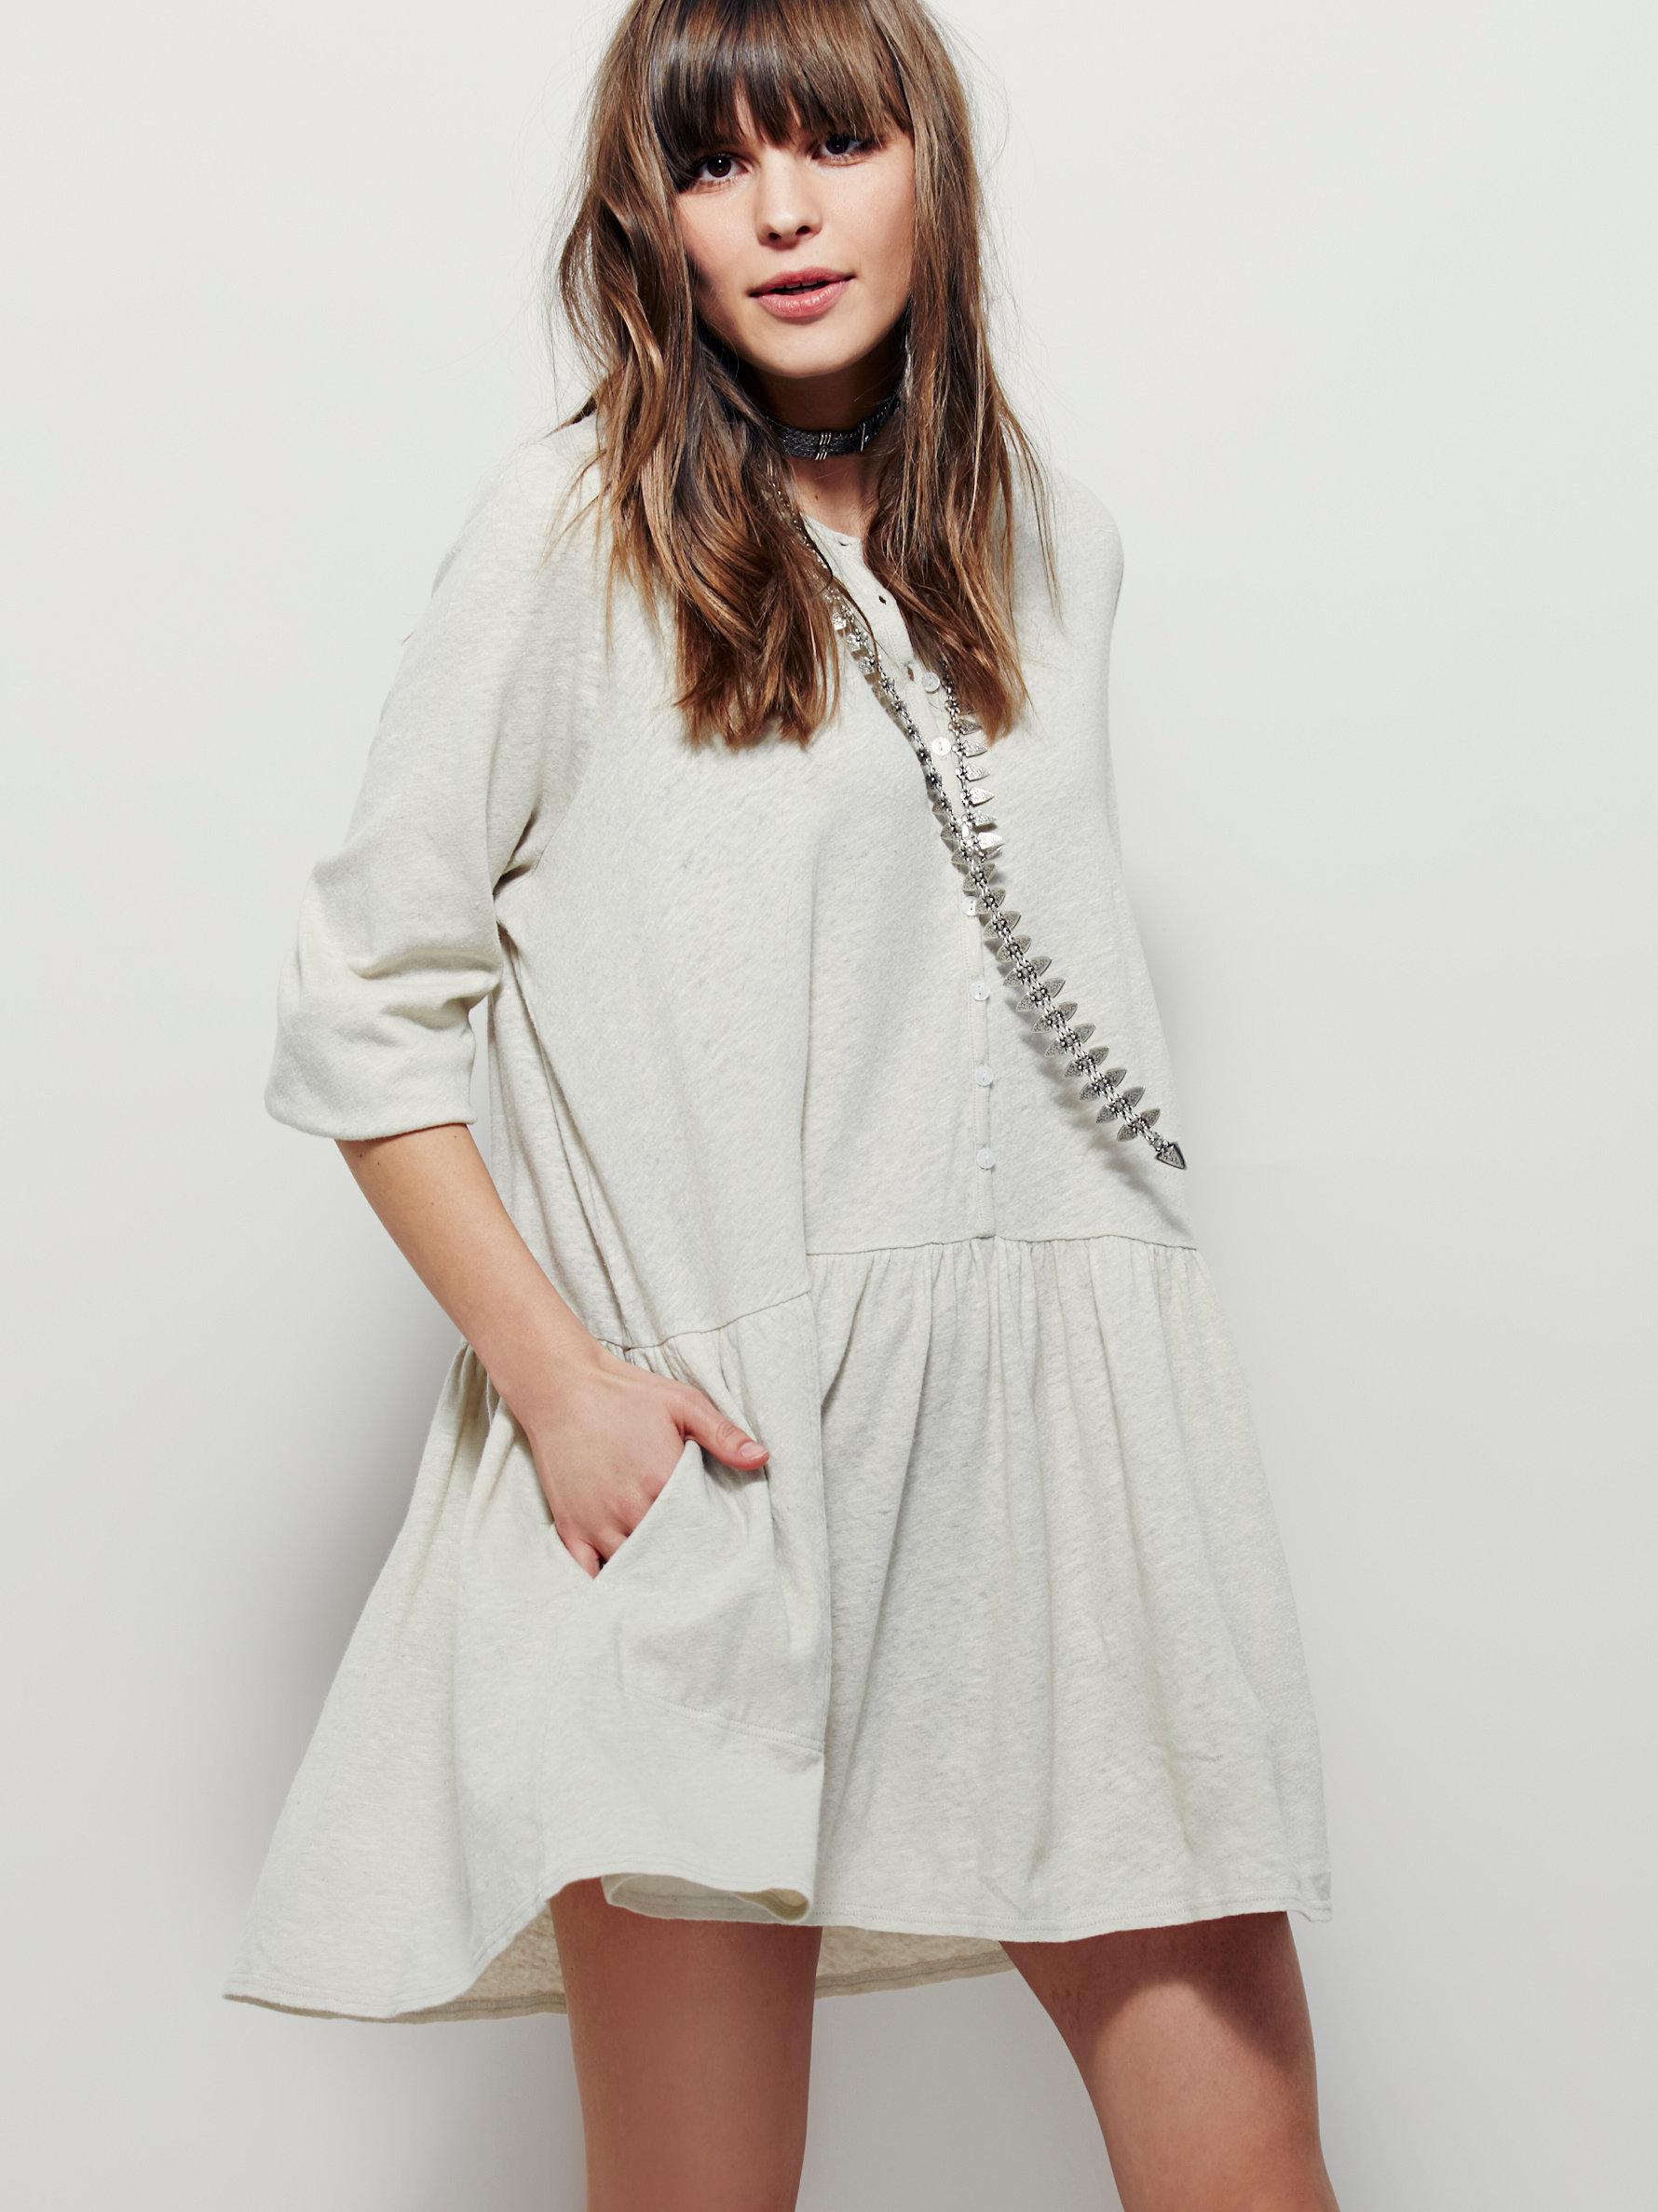 Lyst - Free People Button Up Dress in Gray